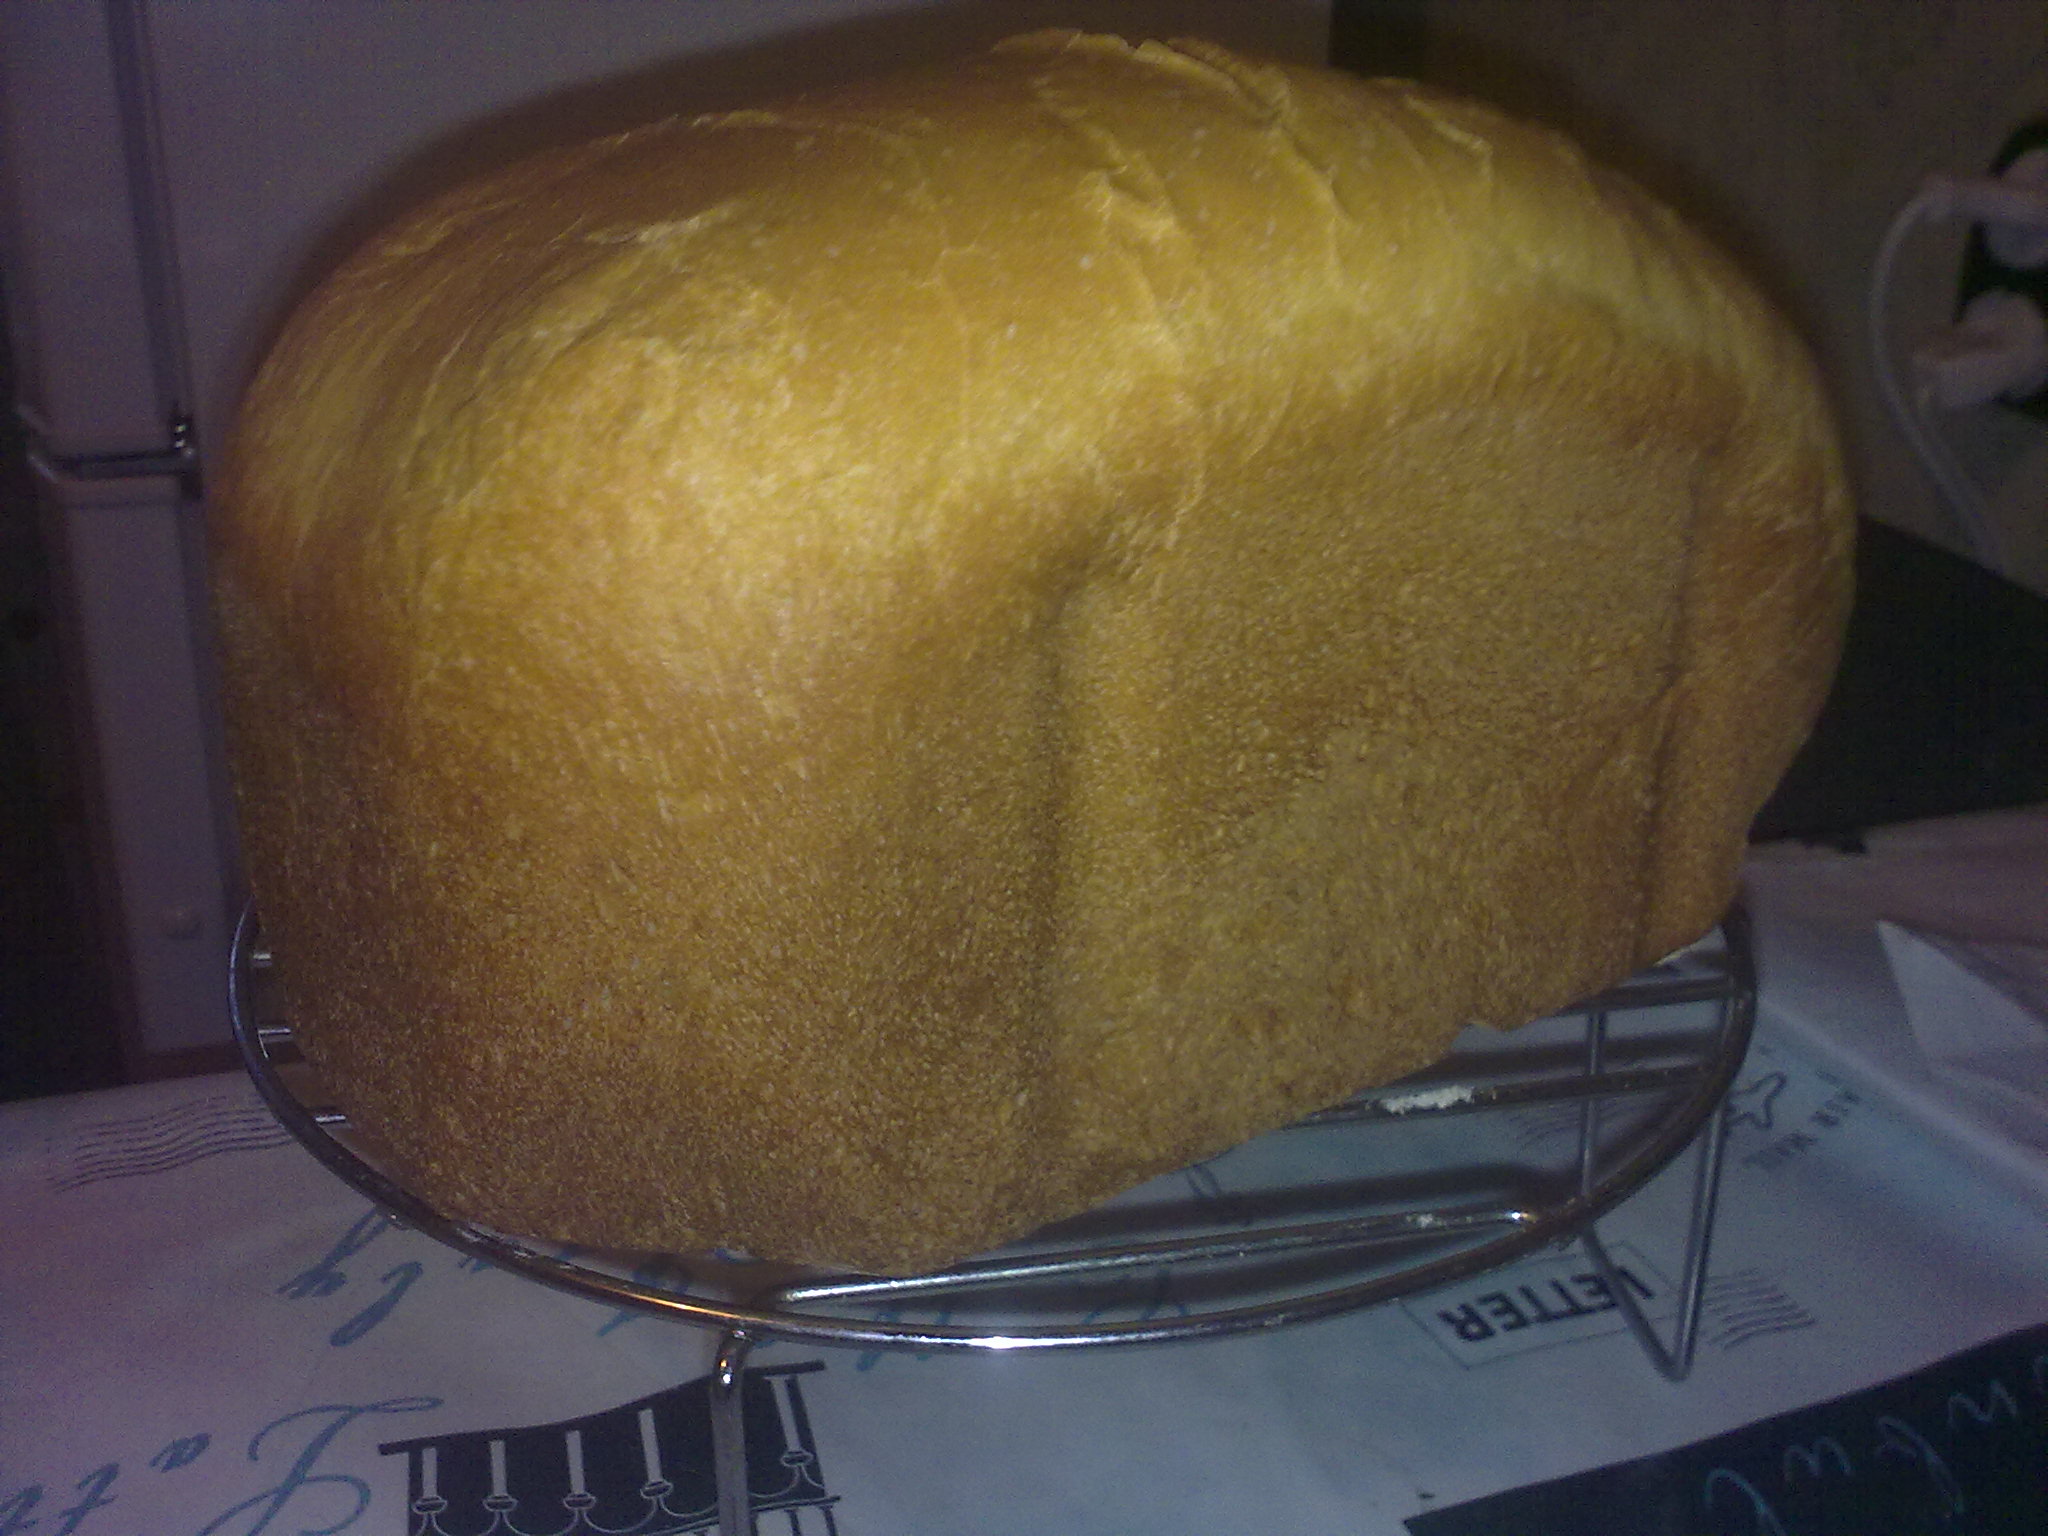 The easiest white bread made from wheat flour